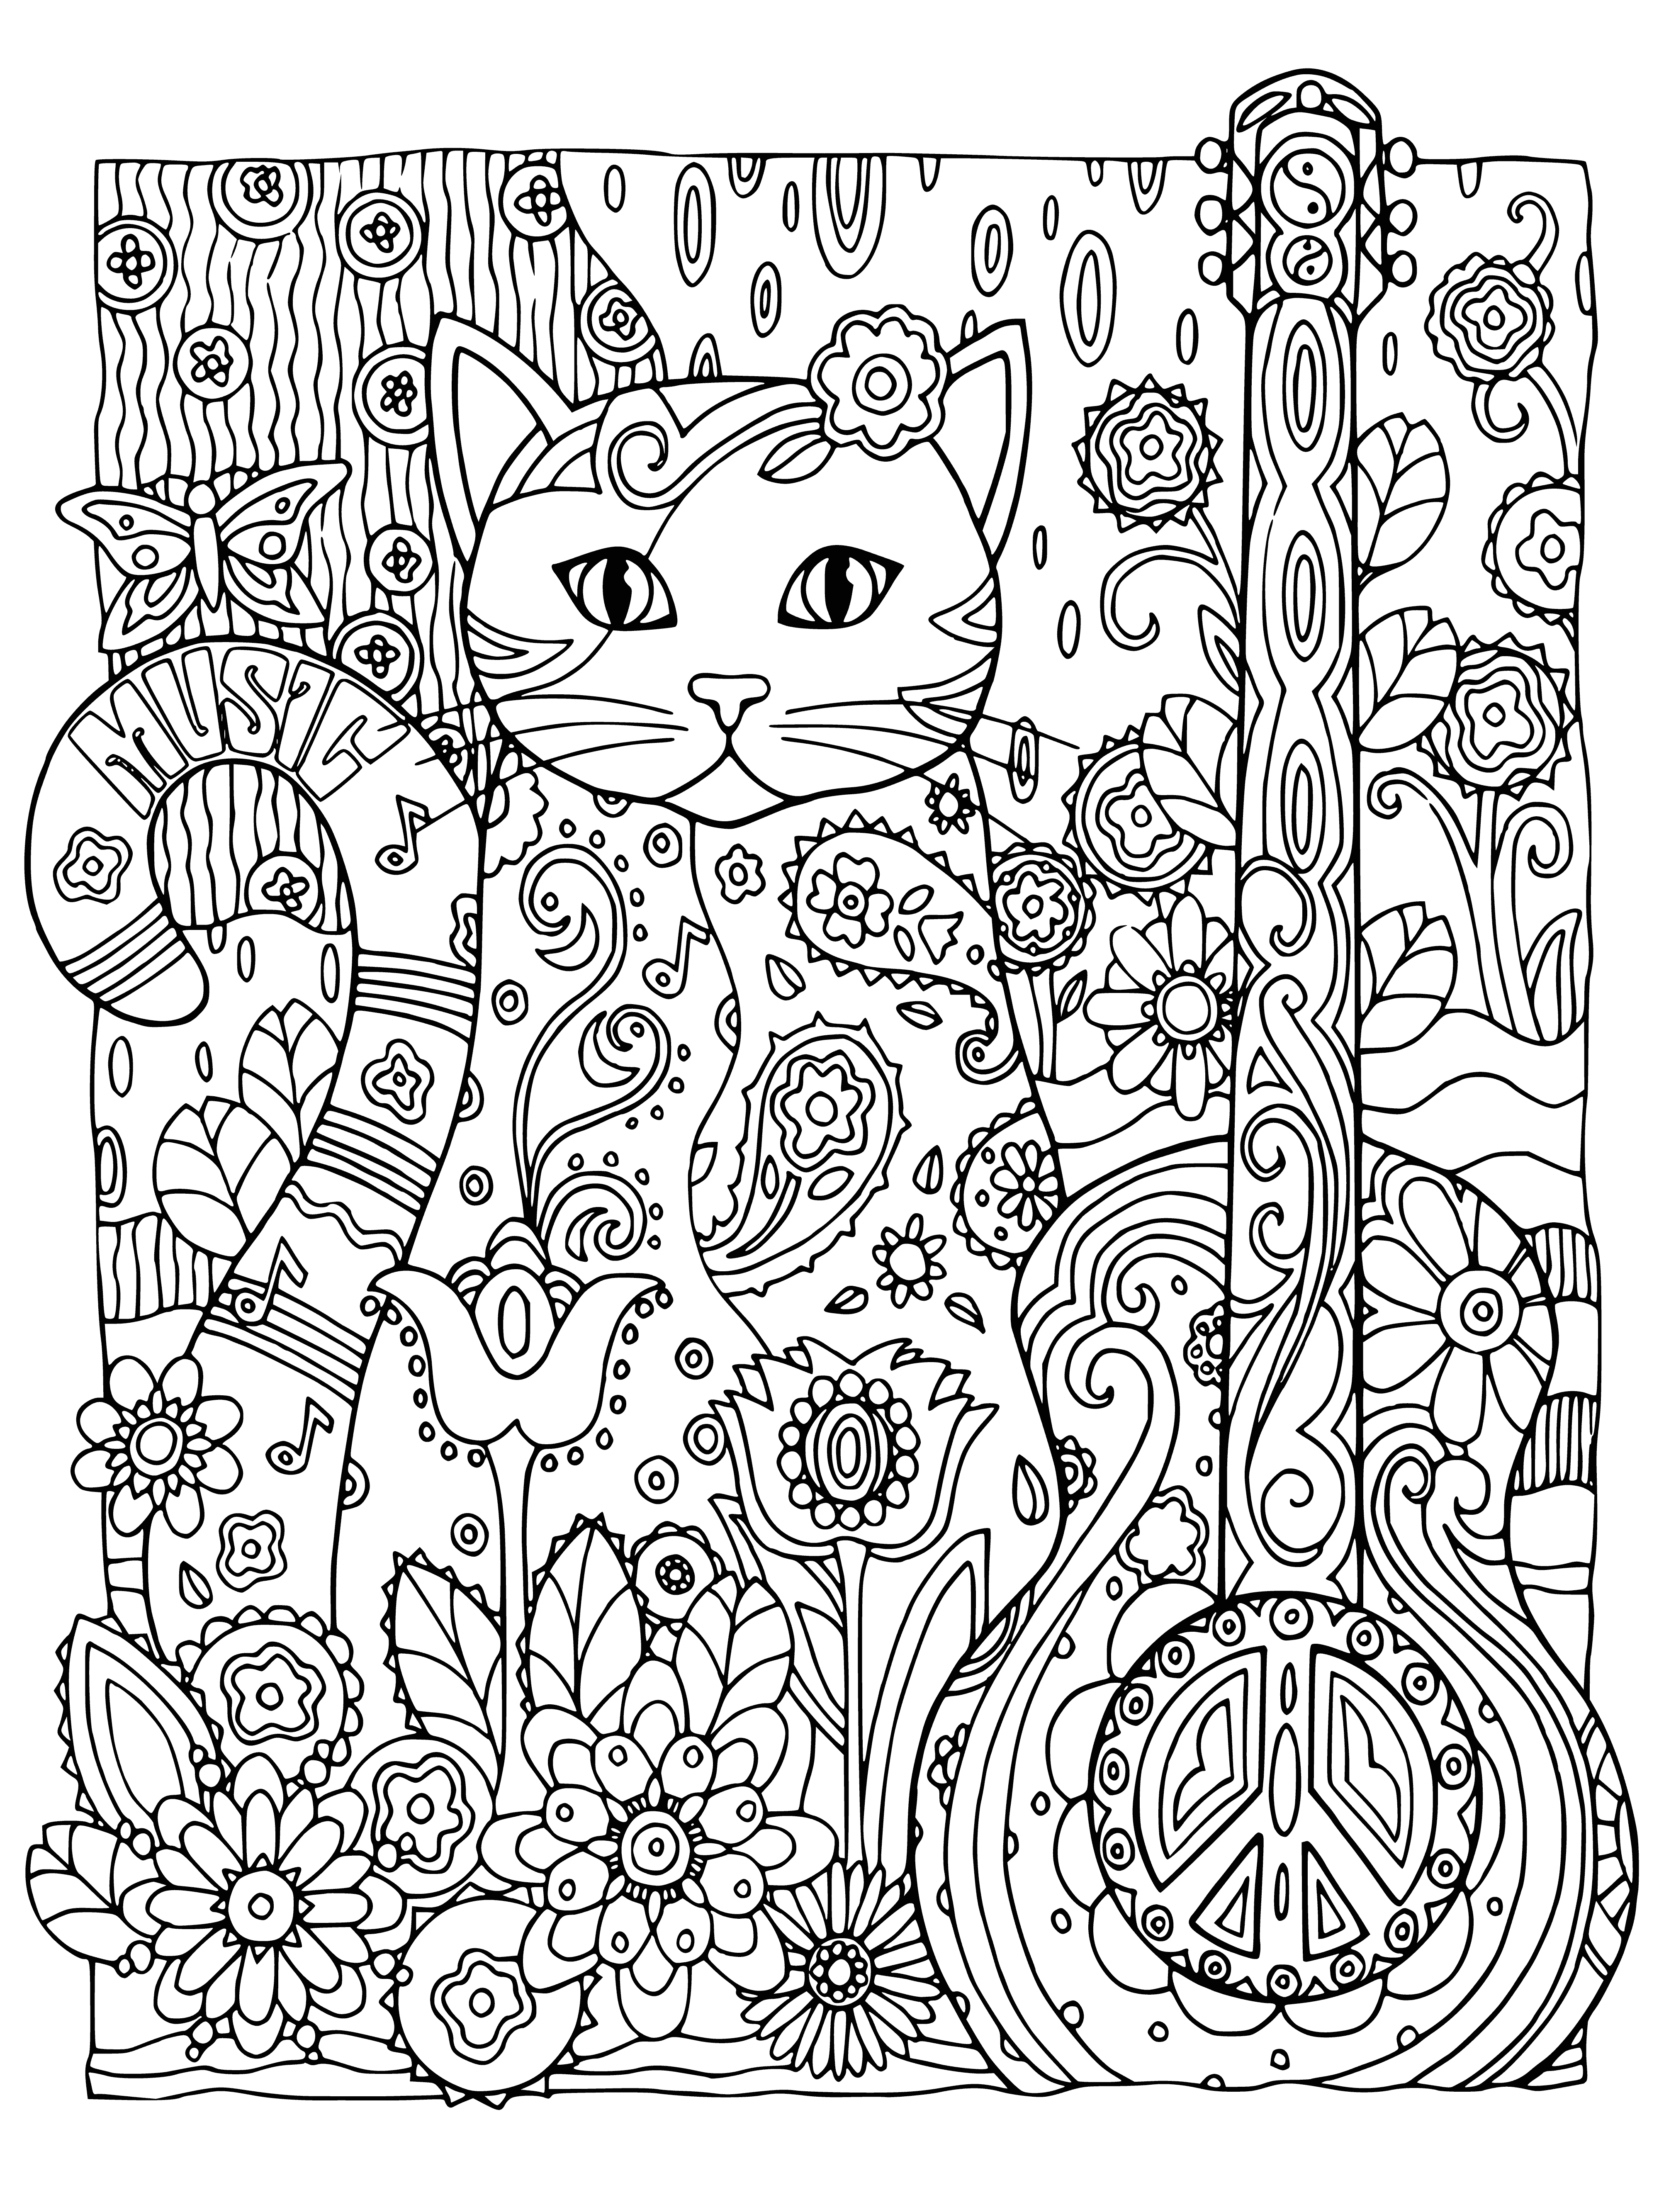 Music is life coloring page